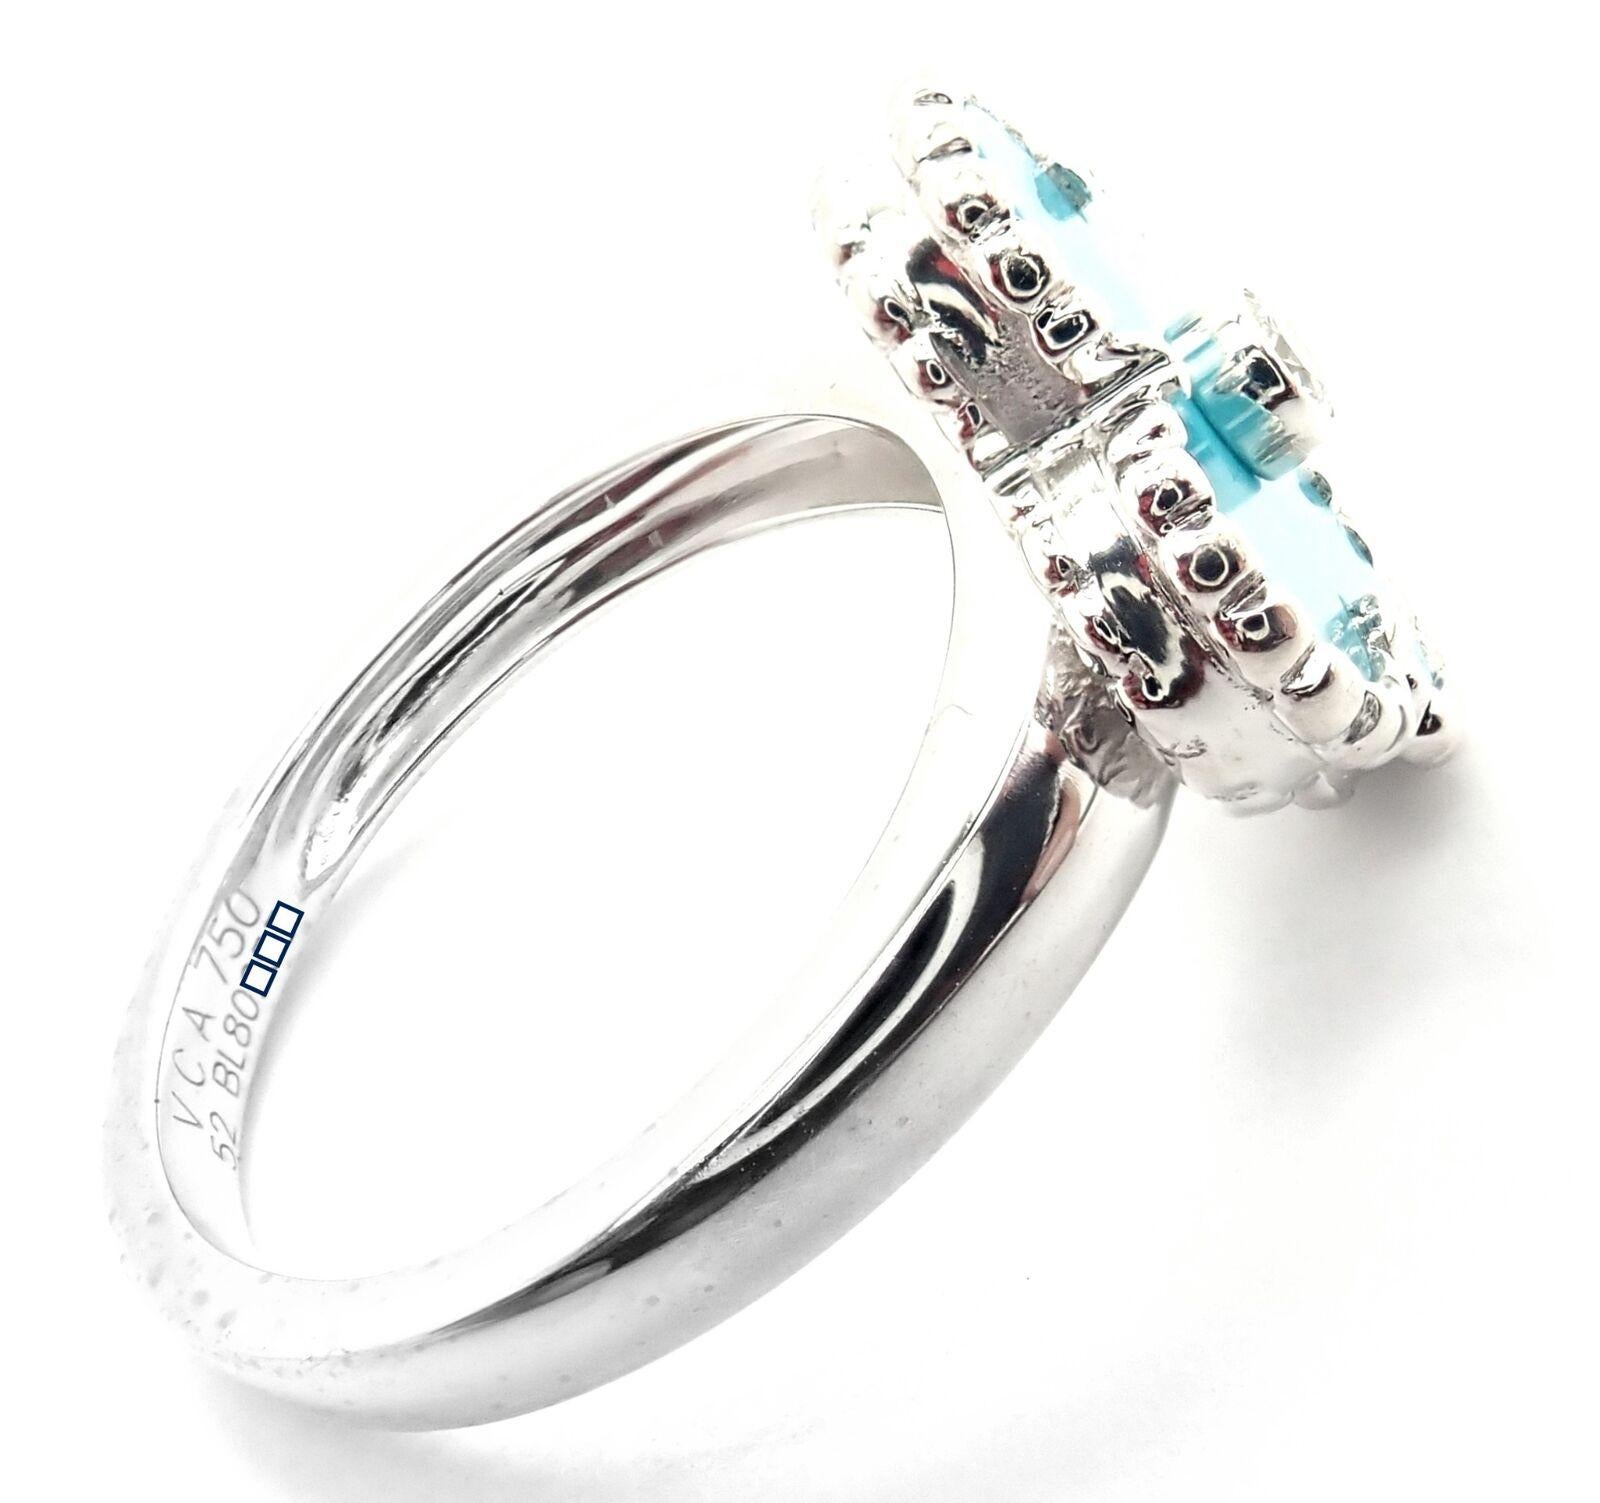 Van Cleef & Arpels Vintage Alhambra 18k White Gold Diamond Turquoise Ring.
With 1 Round brilliant cut diamond .06ct F/VS1
Alhambra cut turquoise.
This ring comes with service paper from Van Cleef & Arpels store and a box.Details:
Size: European 52,